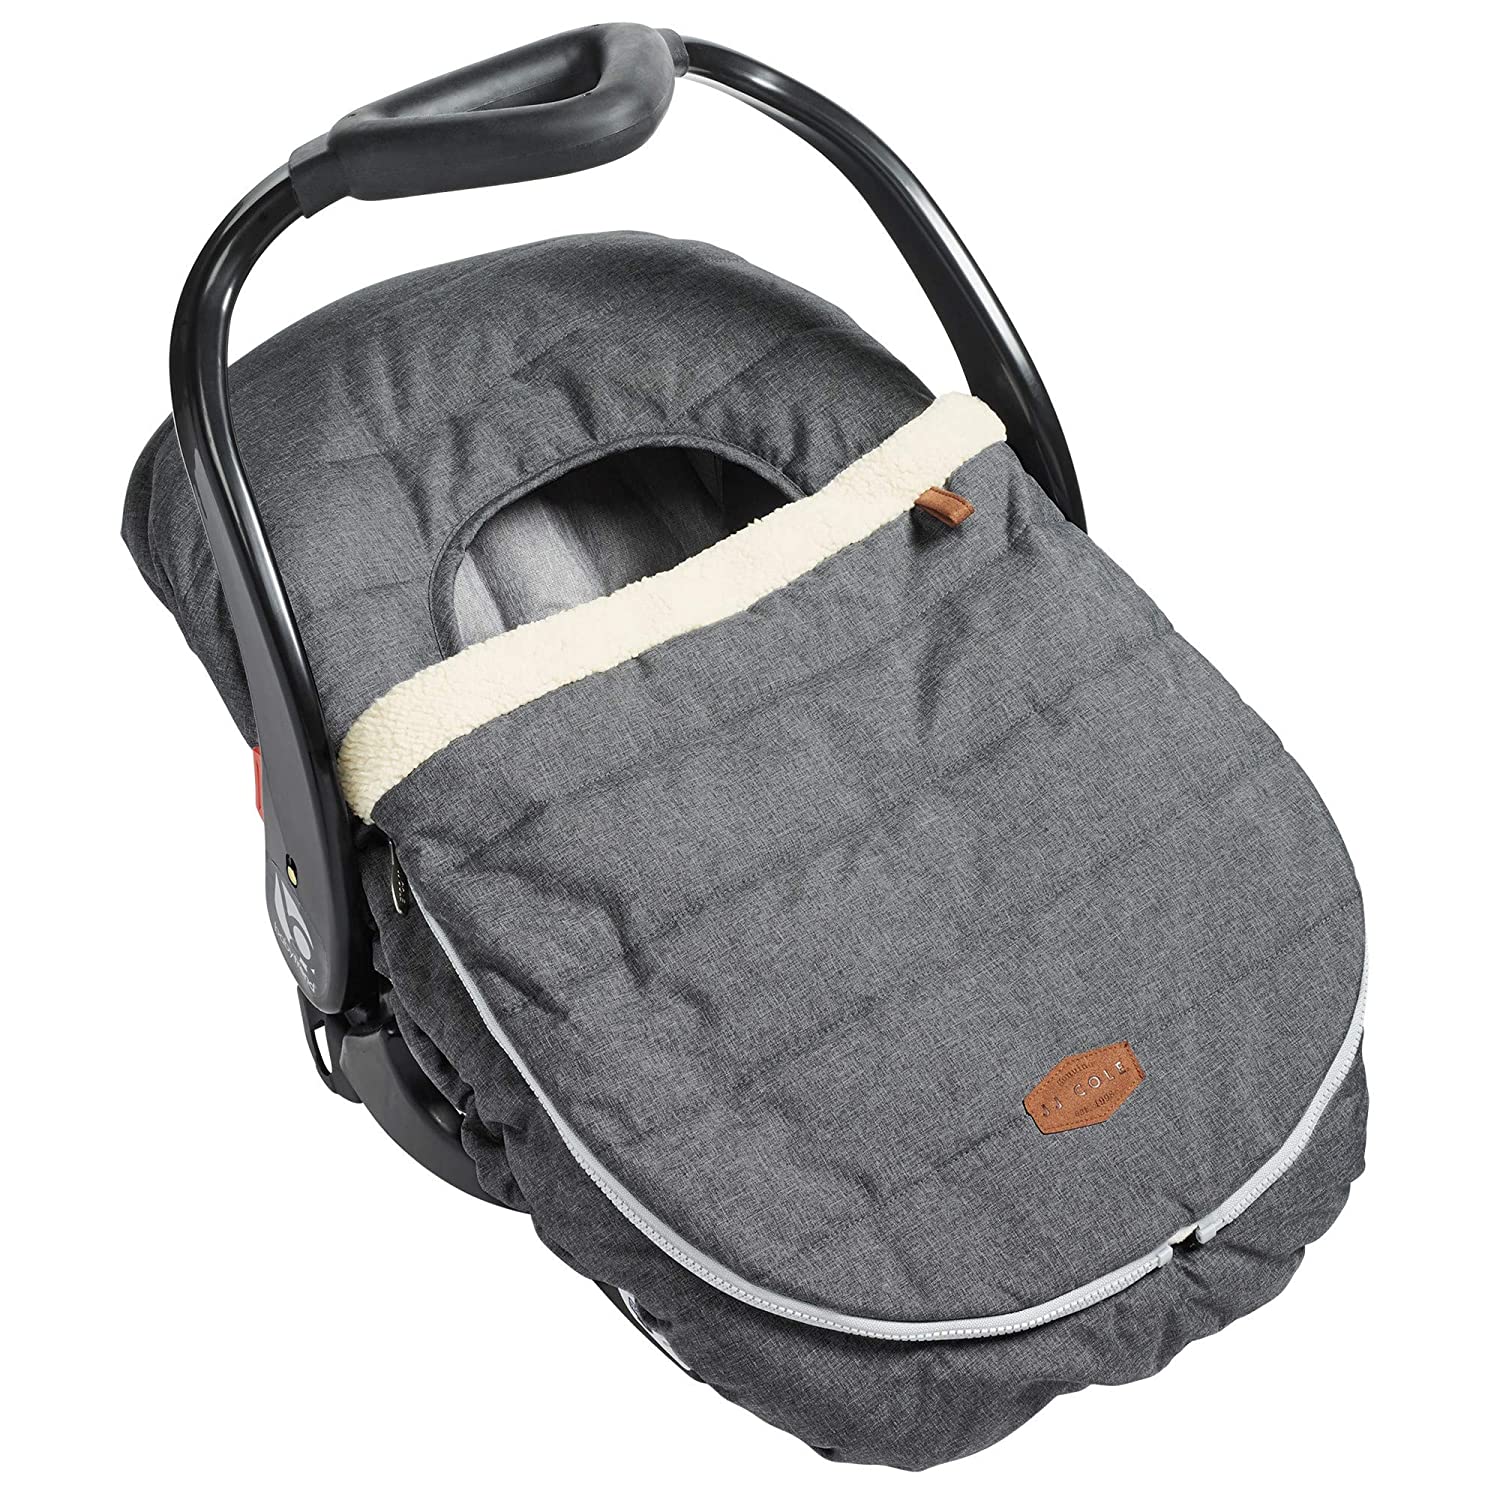 JJ Cole Infant Car Seat Cover - ANB Baby -$20 - $50